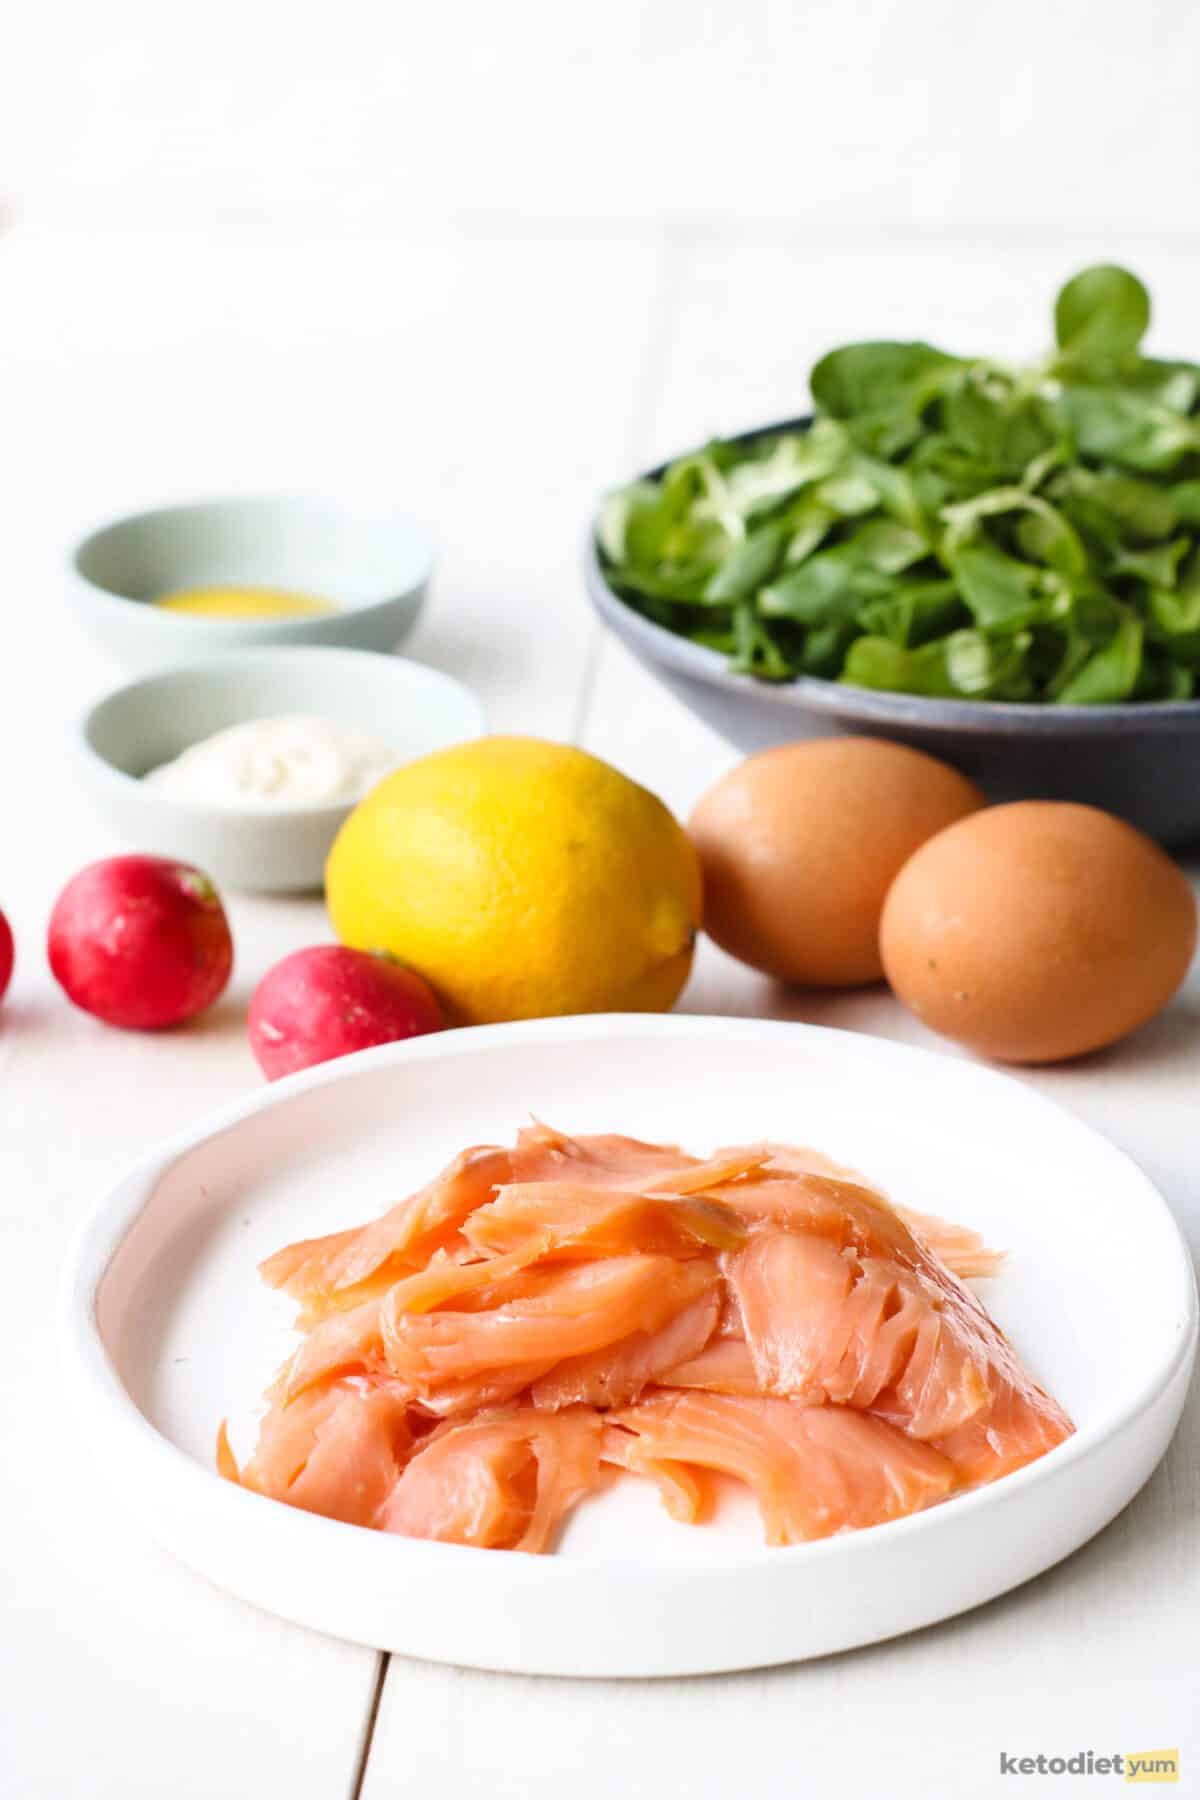 Ingredients arranged on a table needed to make a low carb smoked salmon with valerian and radish salad